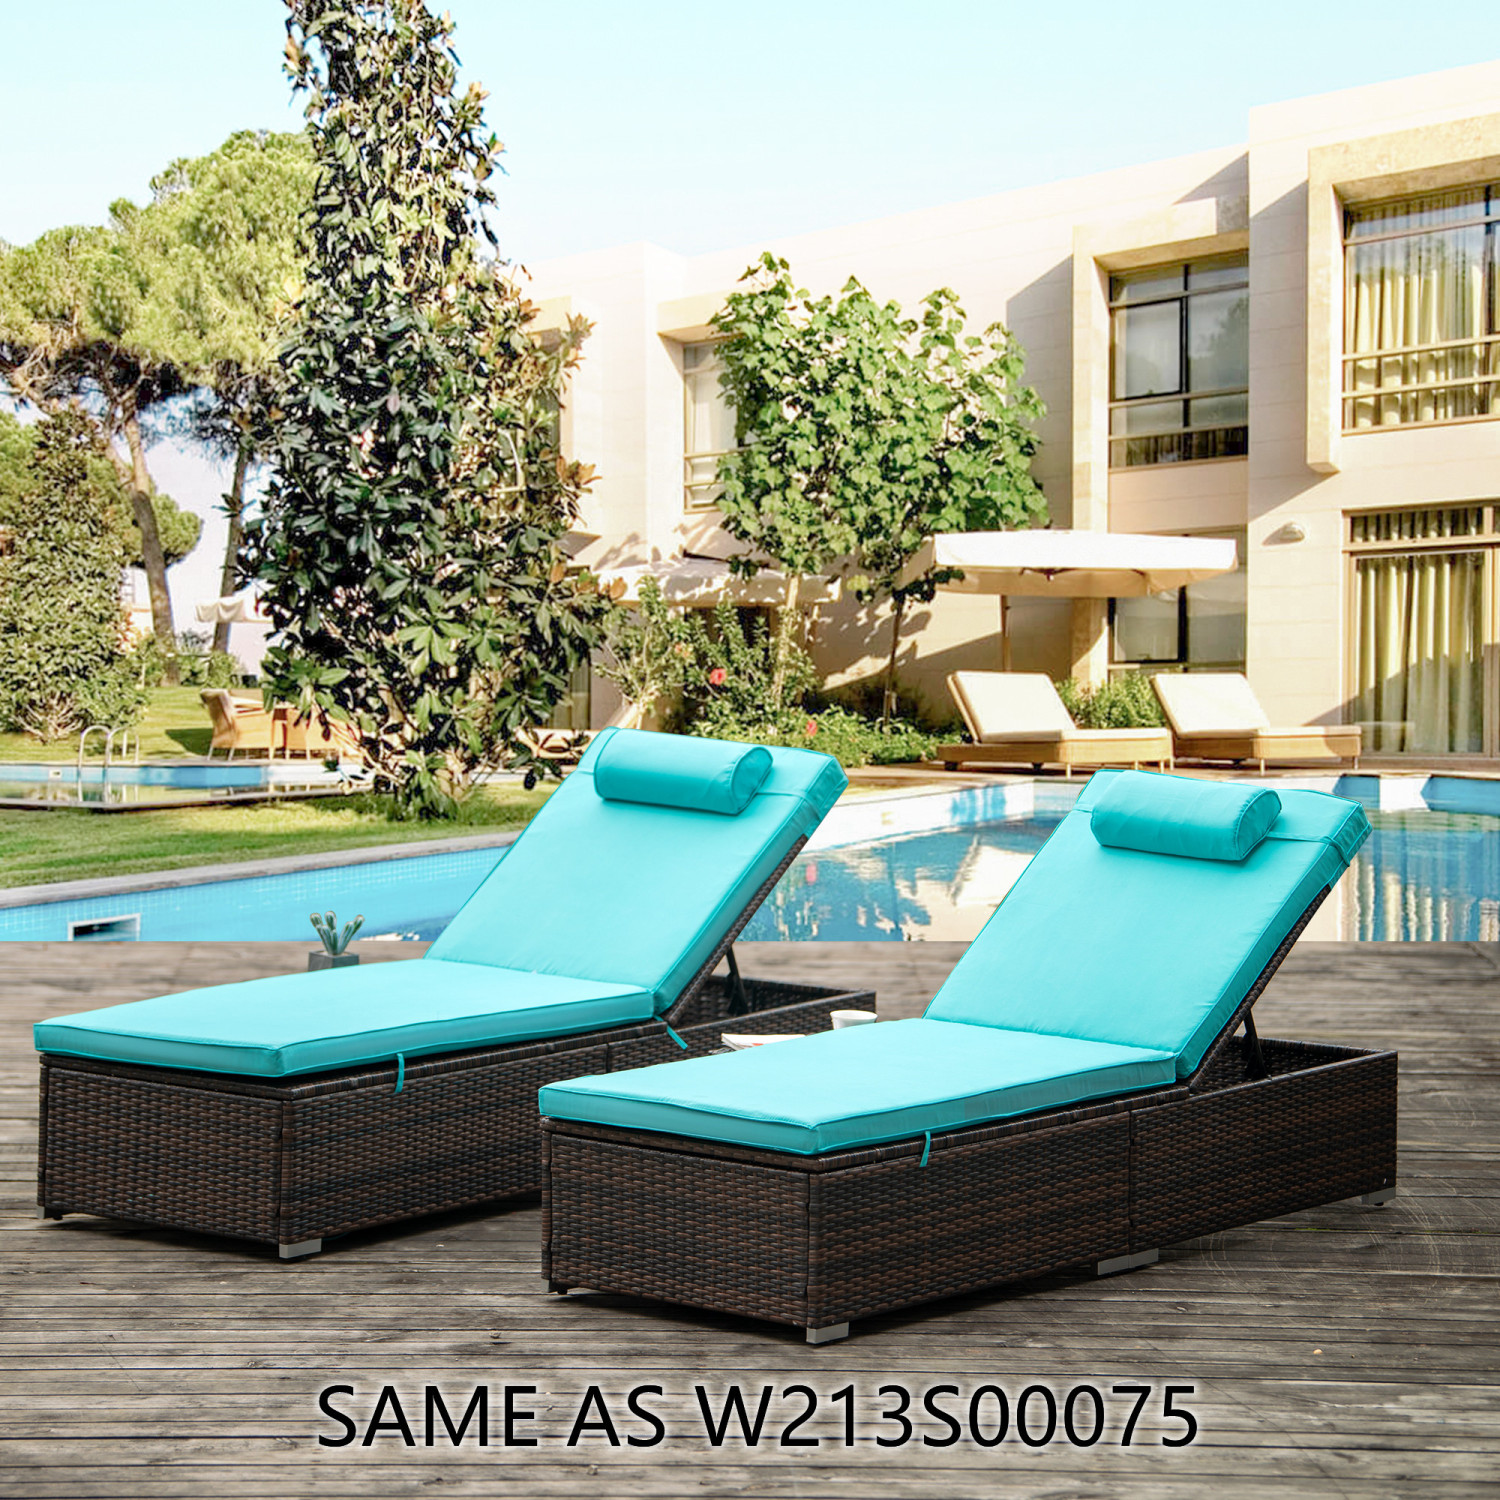 2 Piece Outdoor PE Wicker Chaise Lounge - Patio Brown Rattan Reclining Chair Furniture Set Beach Pool Adjustable Backrest Recliners with Side Table and Comfort Head Pillow - image 1 of 1